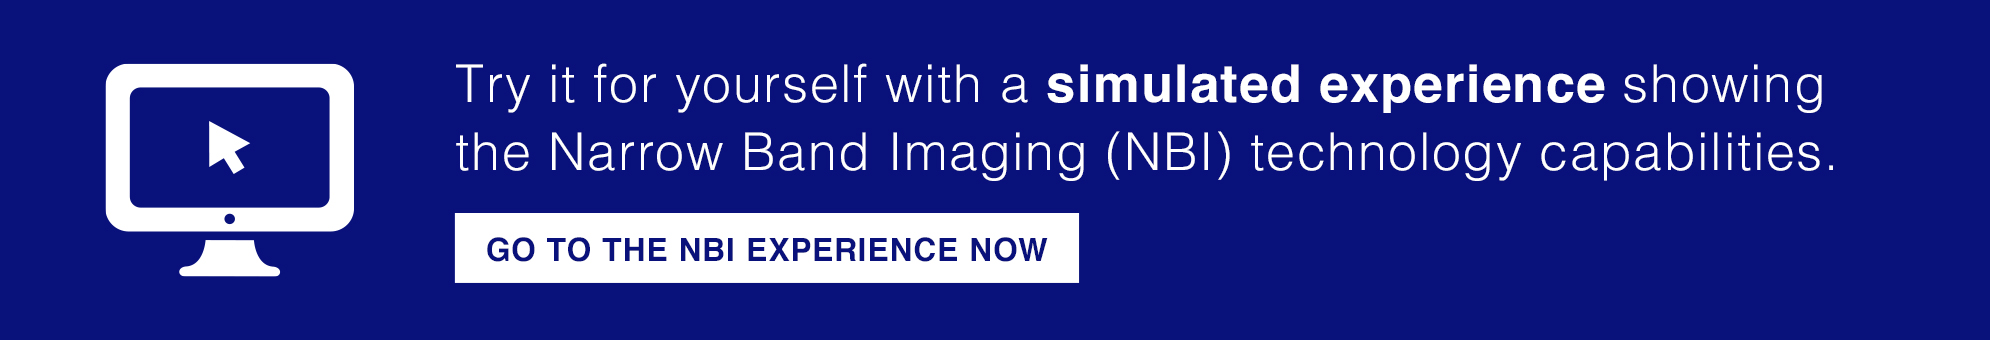 Try it for yourself with a simulated experience showing the Narrow Band Imaging (NBI) technology capabilities. | GO TO THE NBI EXPERIENCE NOW